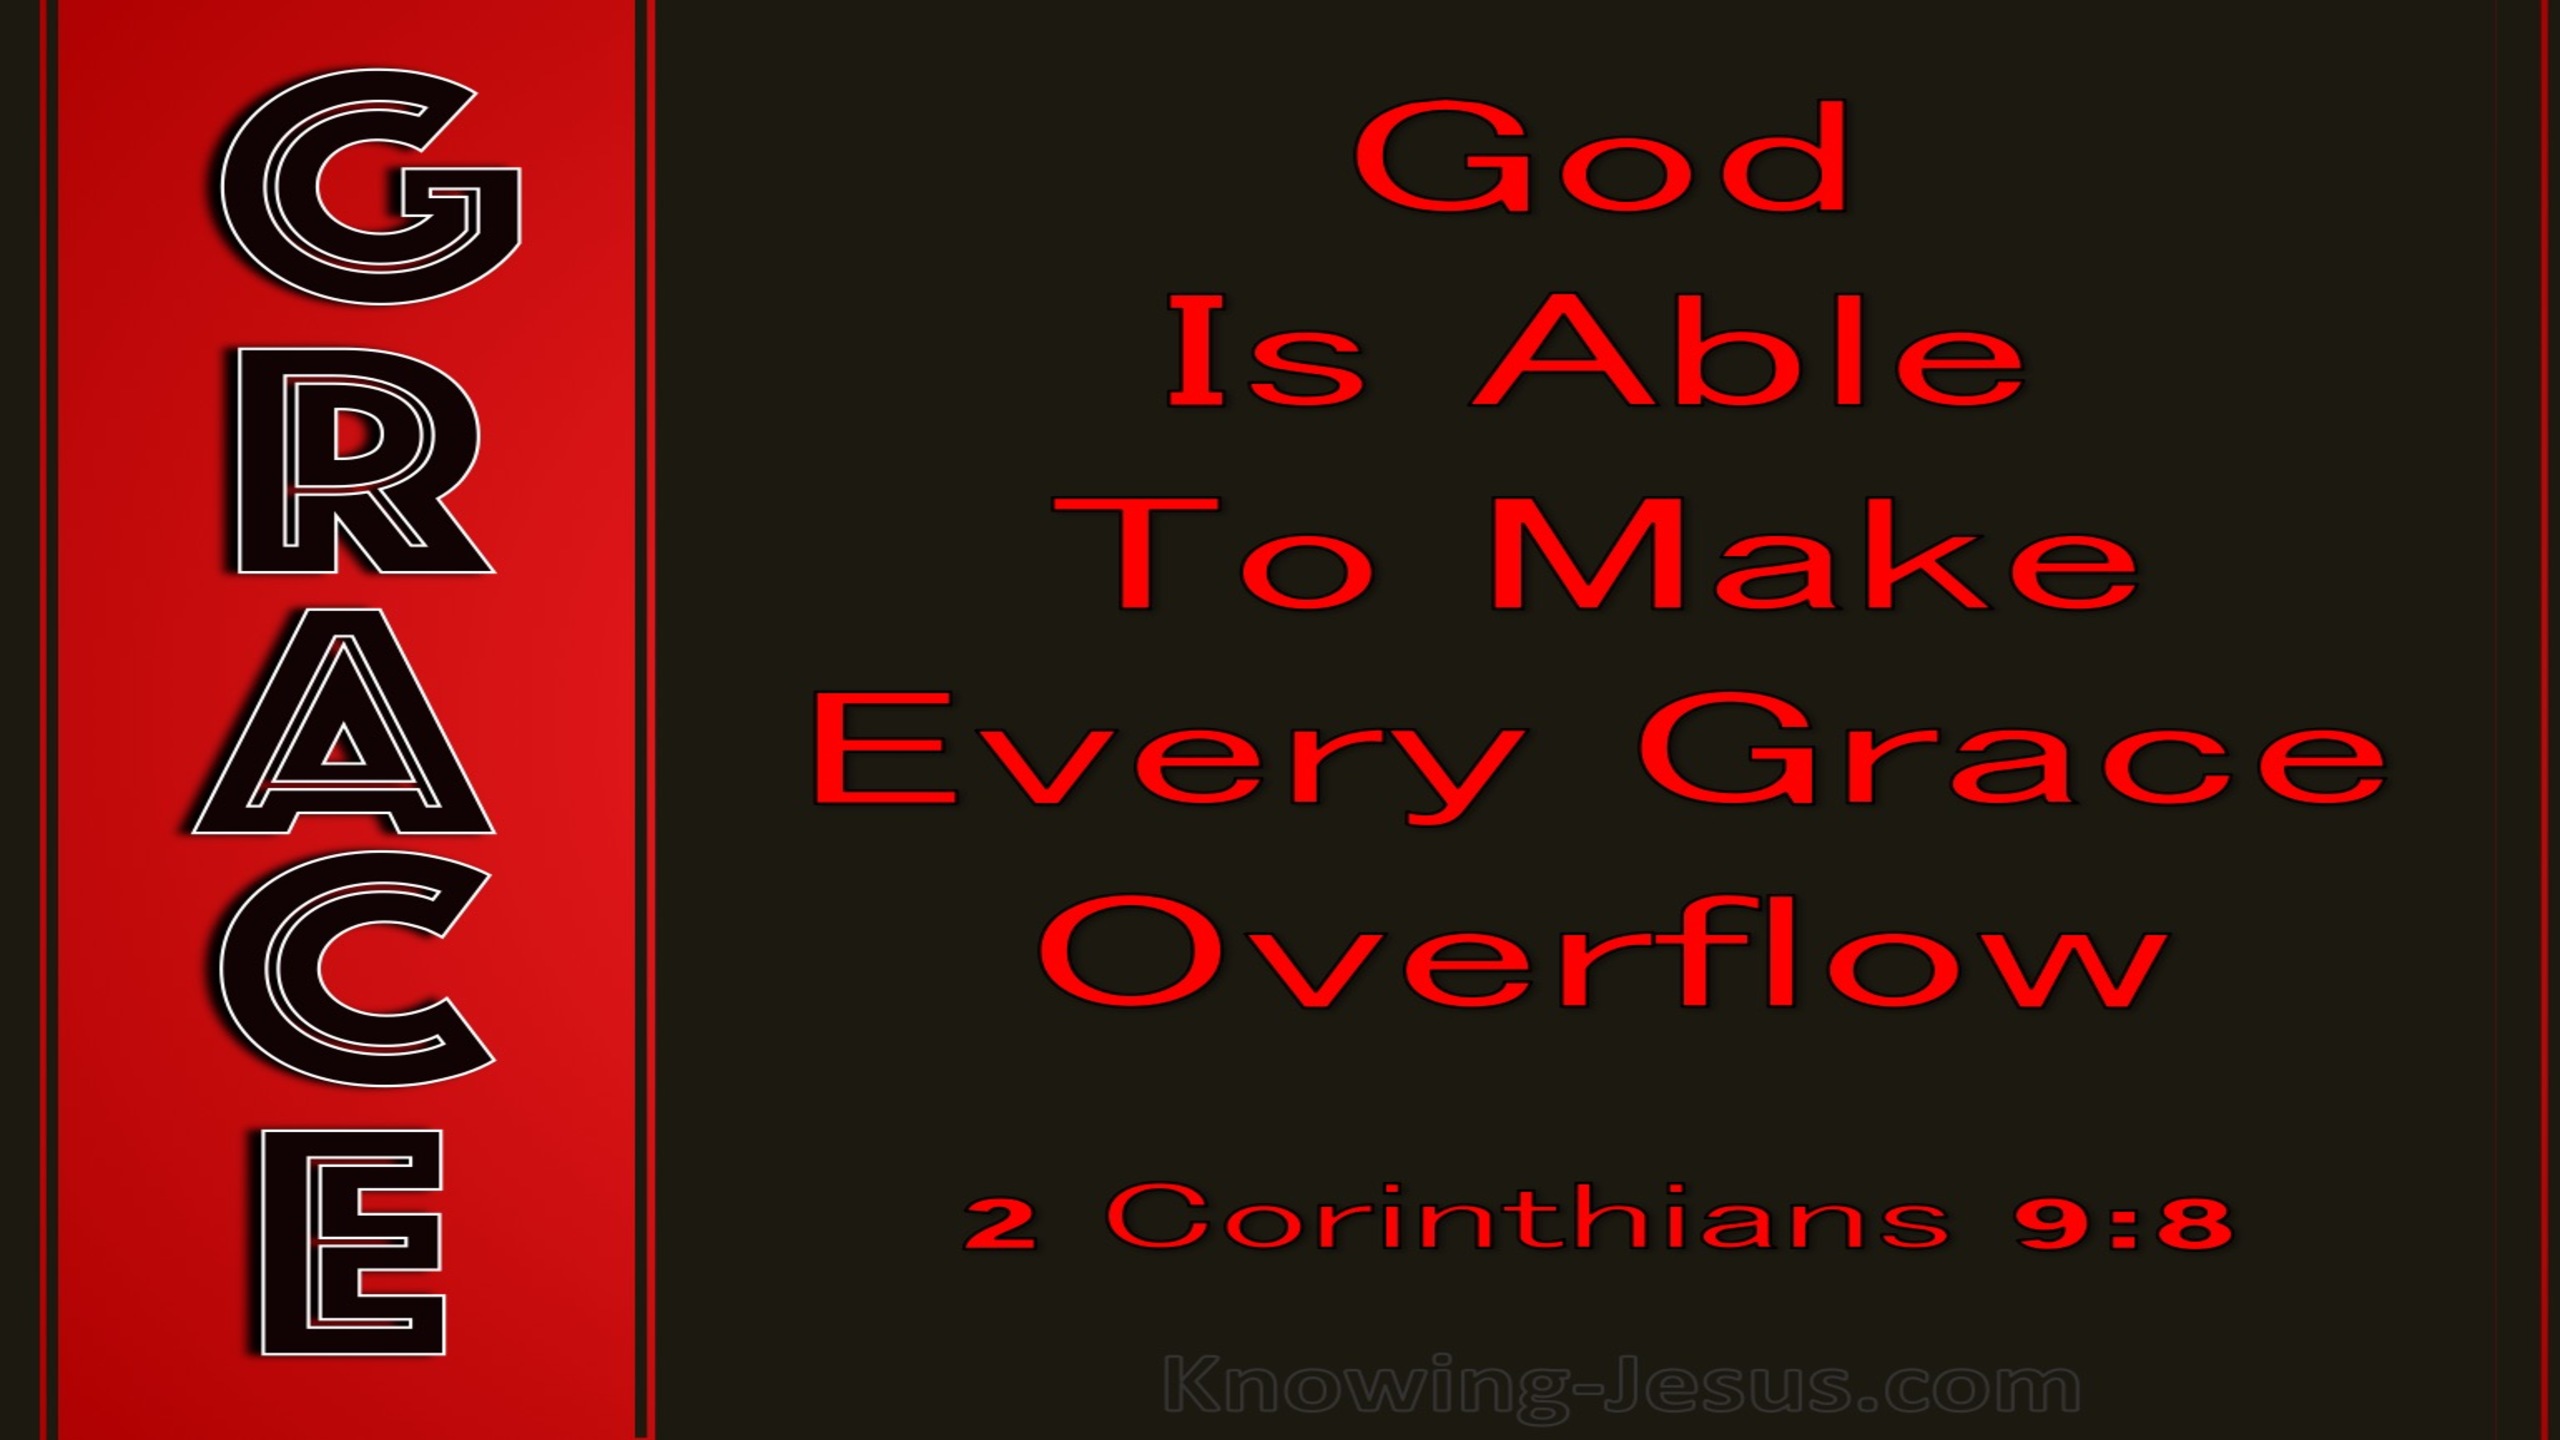 2 Corinthians 9:8 God Is Able To Make Grace Overflow (red)